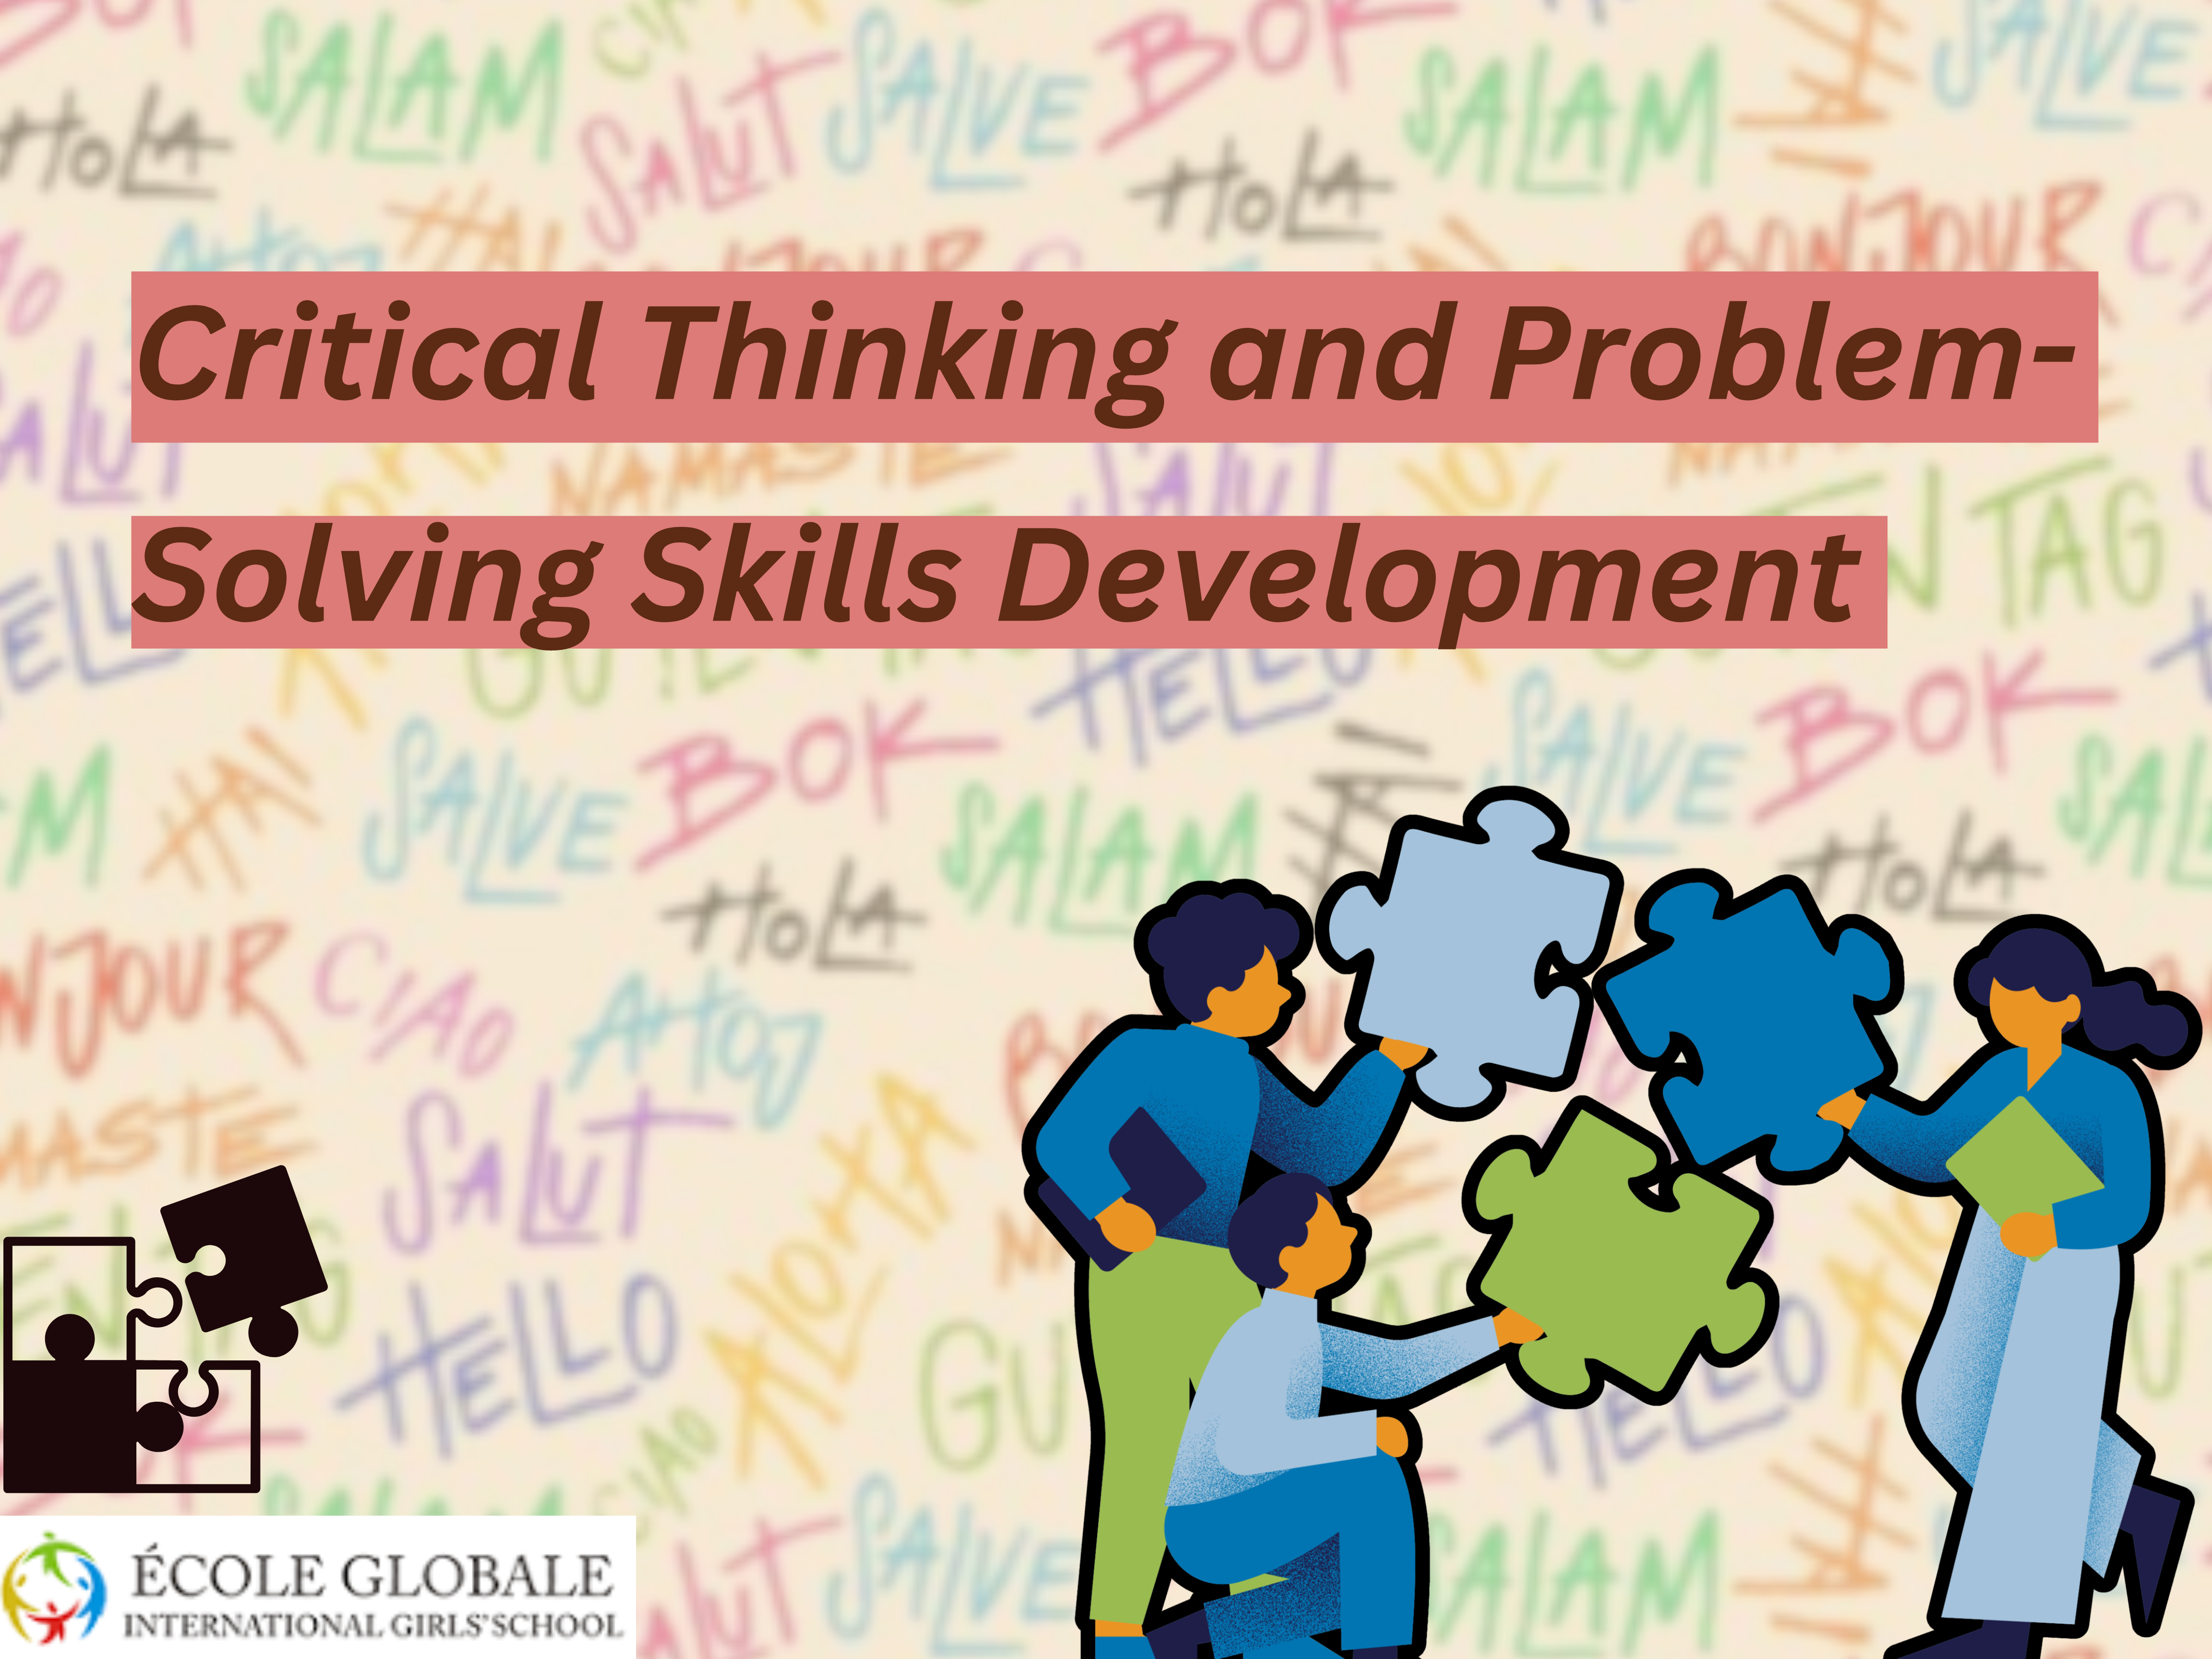 You are currently viewing Critical Thinking and Problem-Solving Skills Development in Ecole Globale